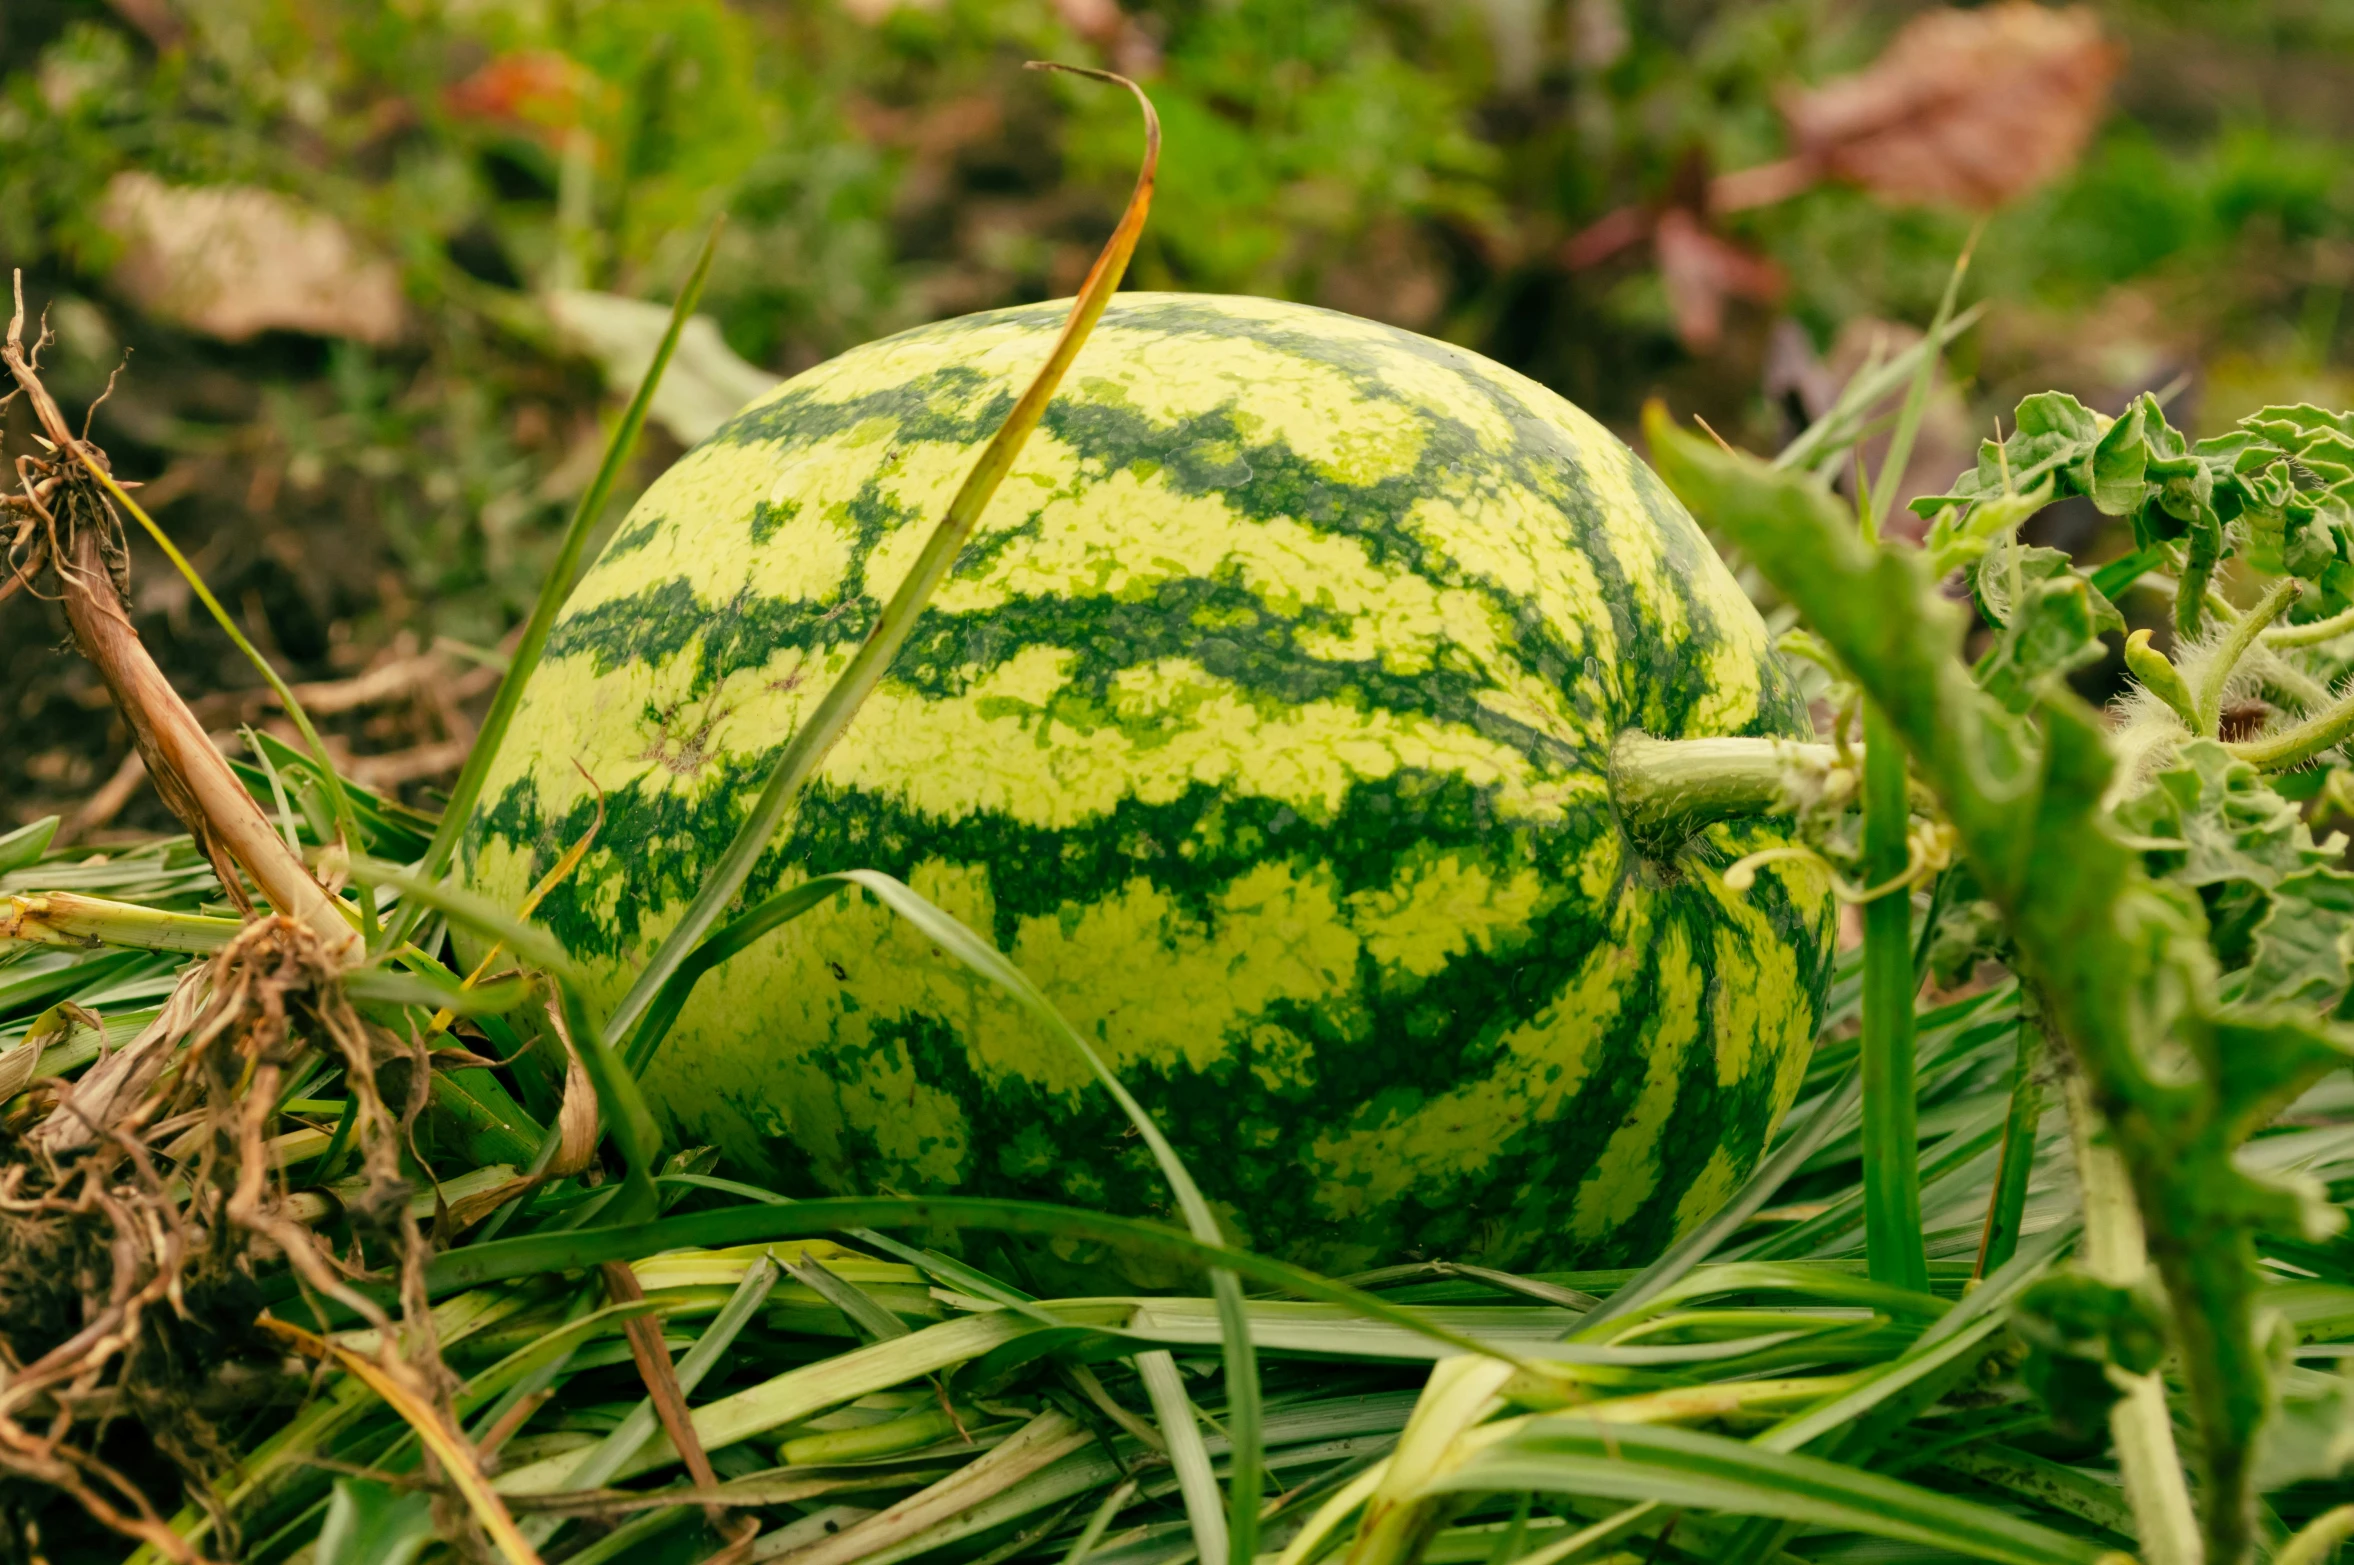 a watermelon that is sitting in the grass, striped, close up of iwakura lain, dezeen, hay